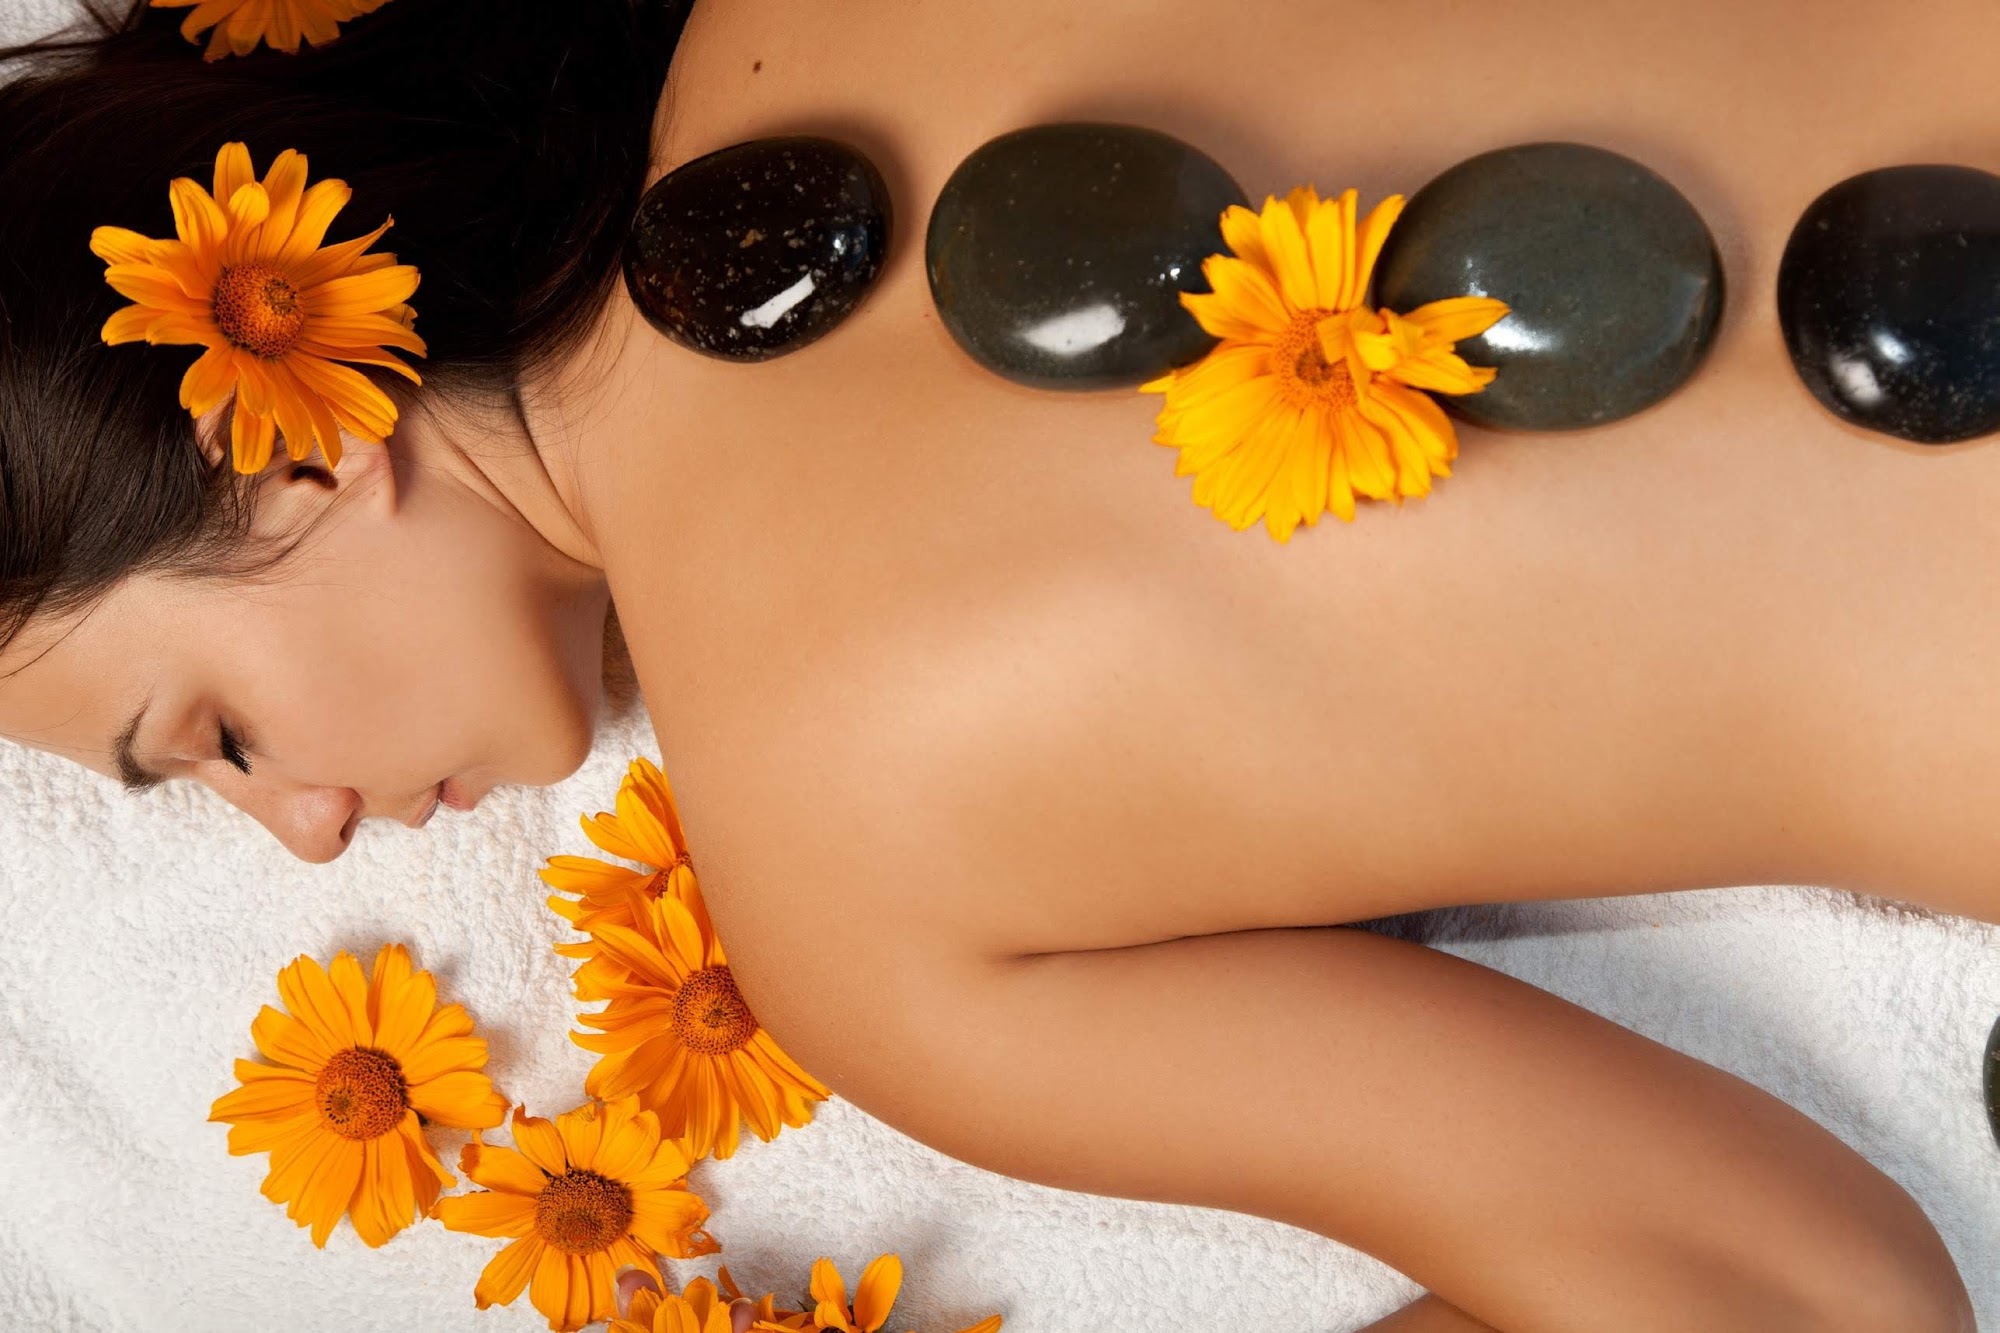 A Golden Touch Massage For Your Health